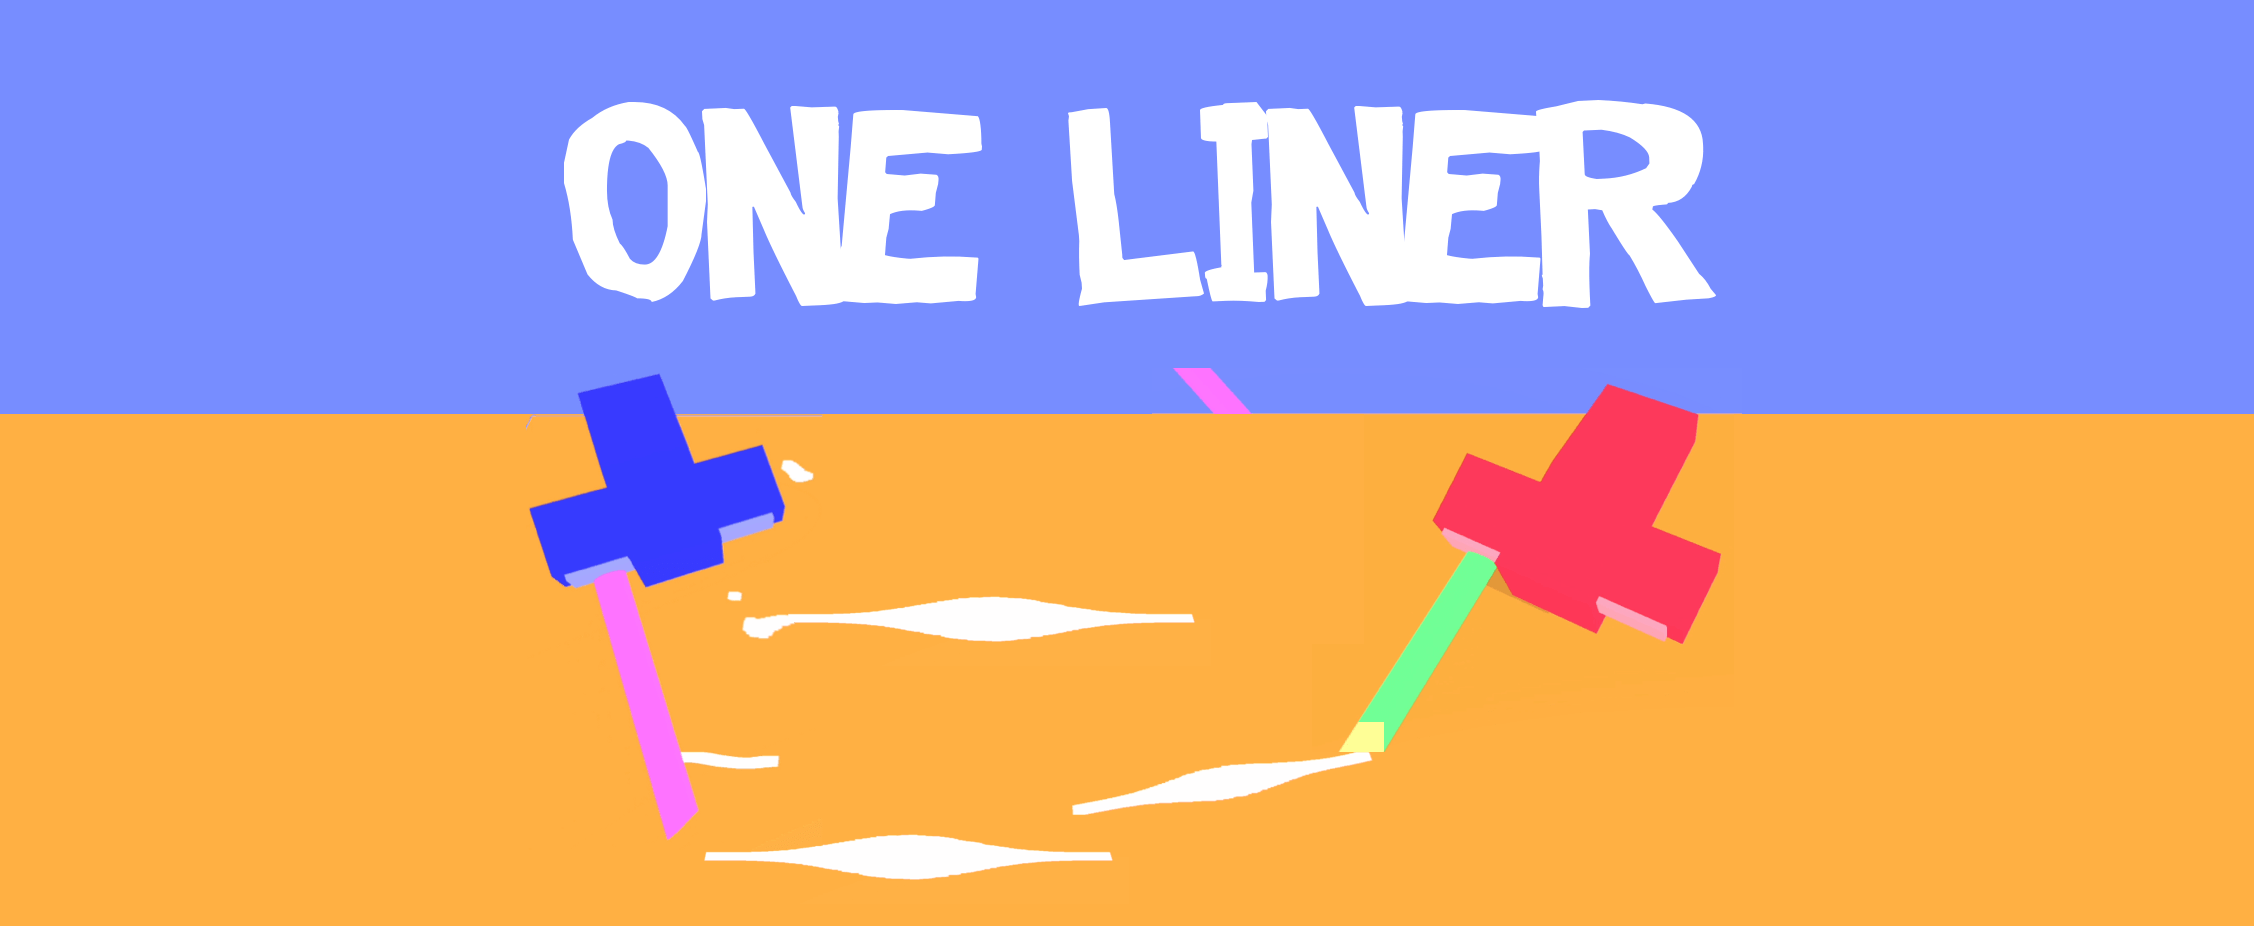 ONE LINER